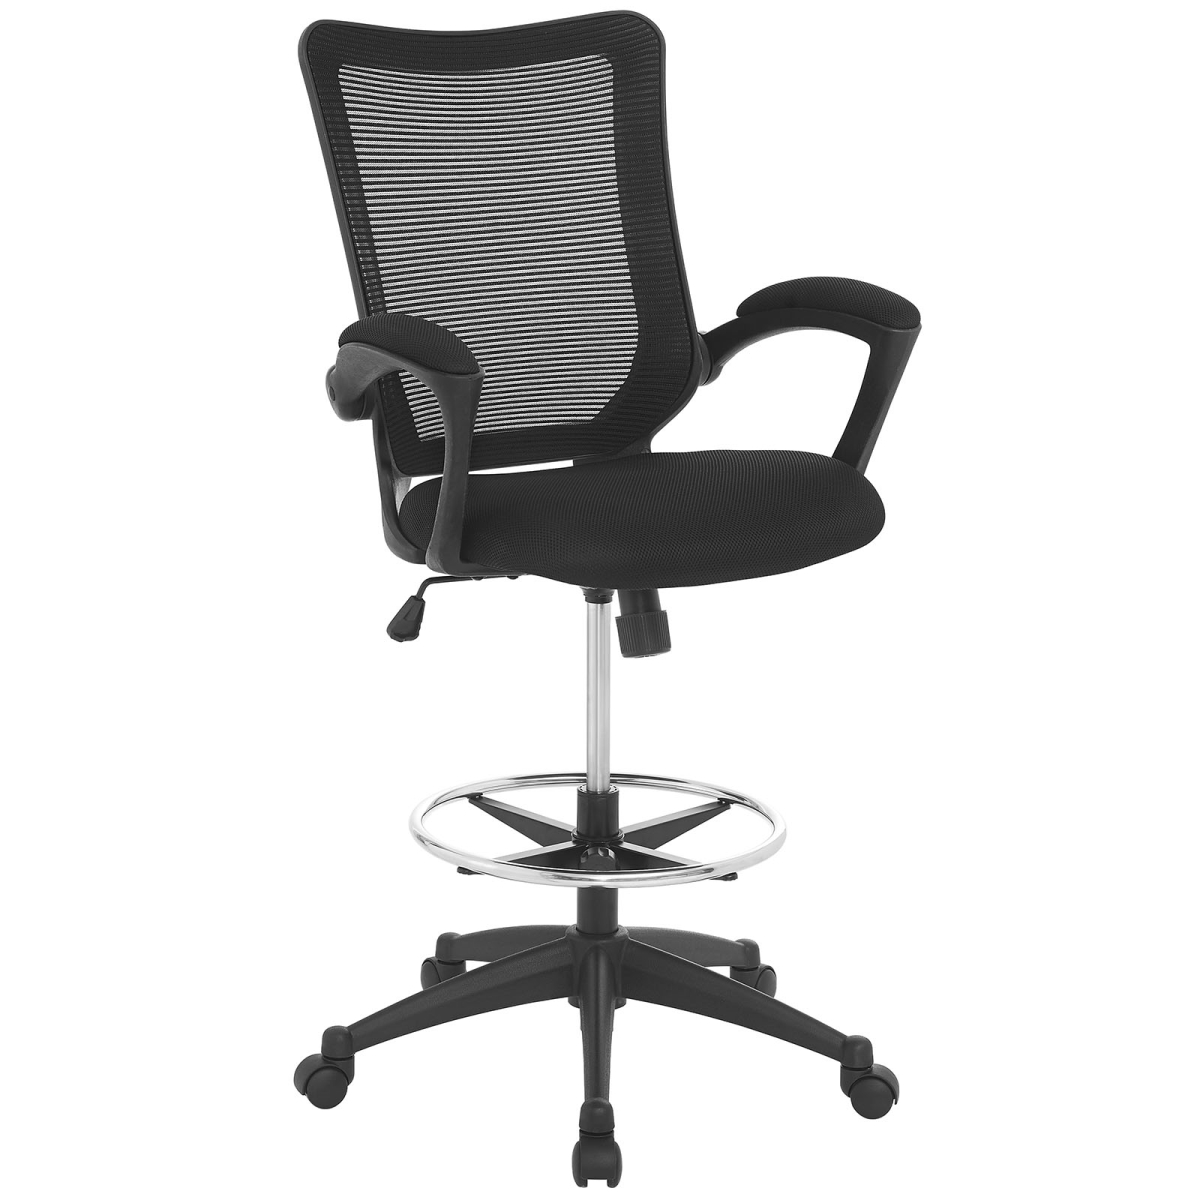 Modway Eei-2287-blk 42 H X 27.5 W X 26.5 L In. Project Drafting Chair, Black